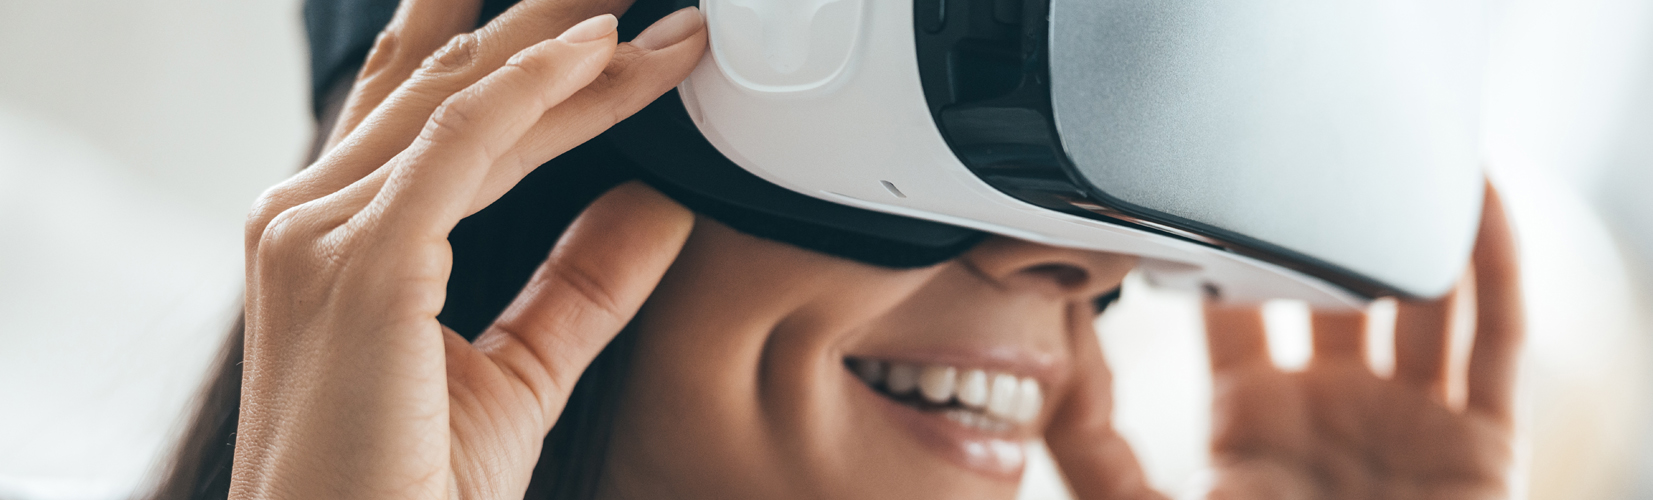 A woman using VR headset